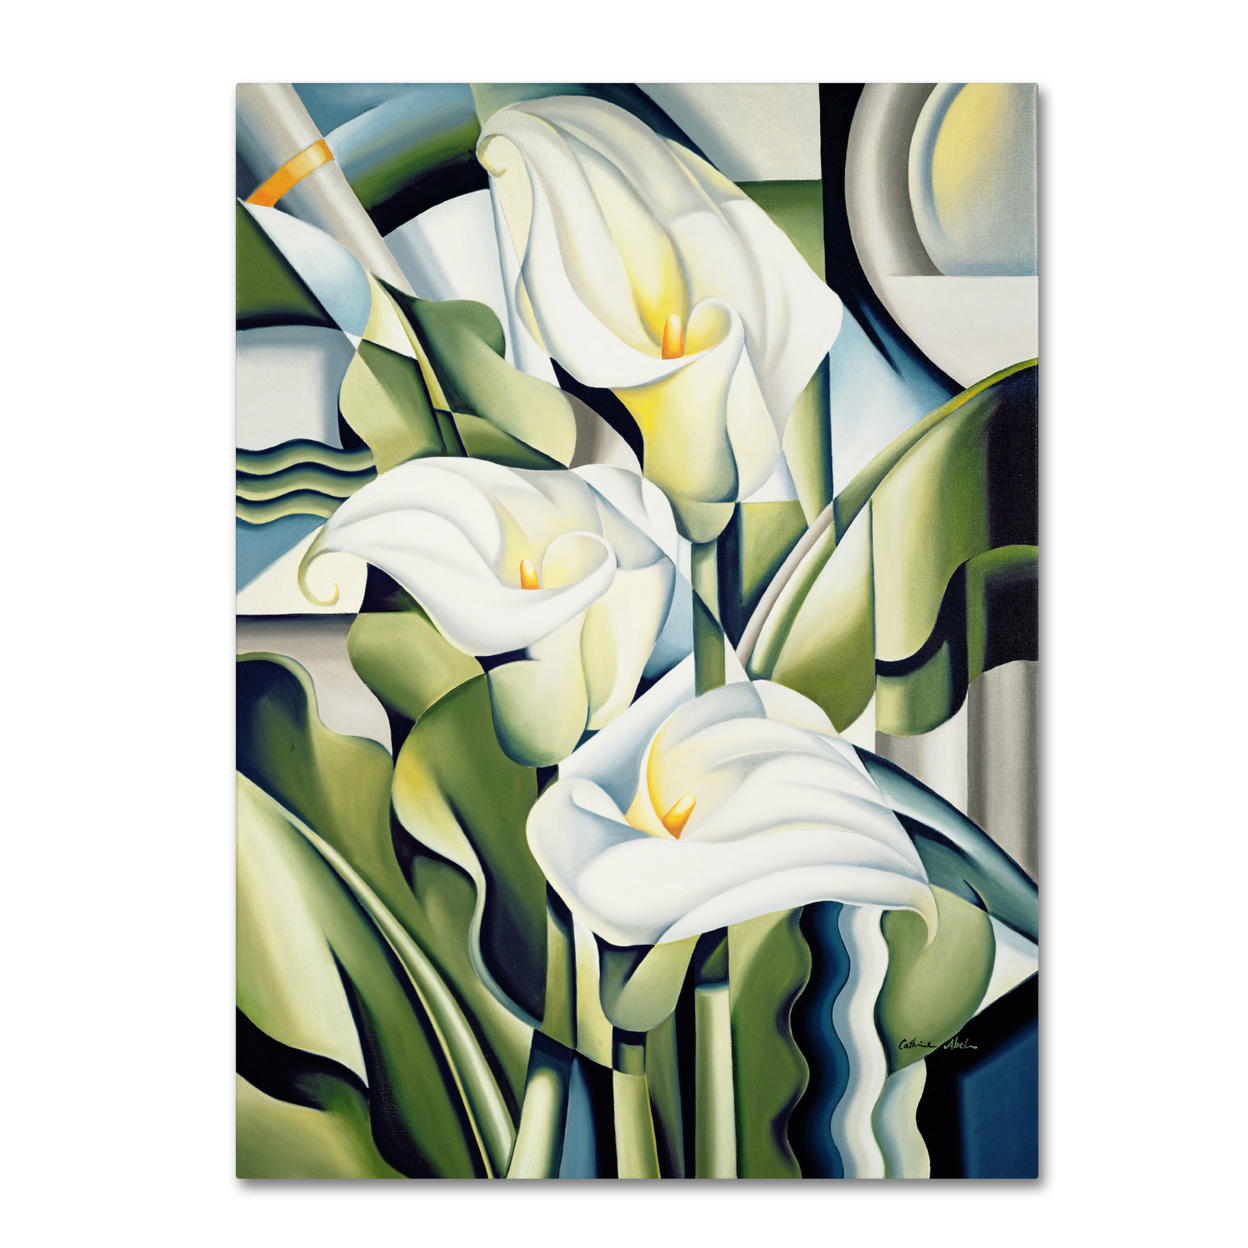 Catherine Abel 'Cubist Lilies 2002' Canvas Wall Art 35 X 47 Inches